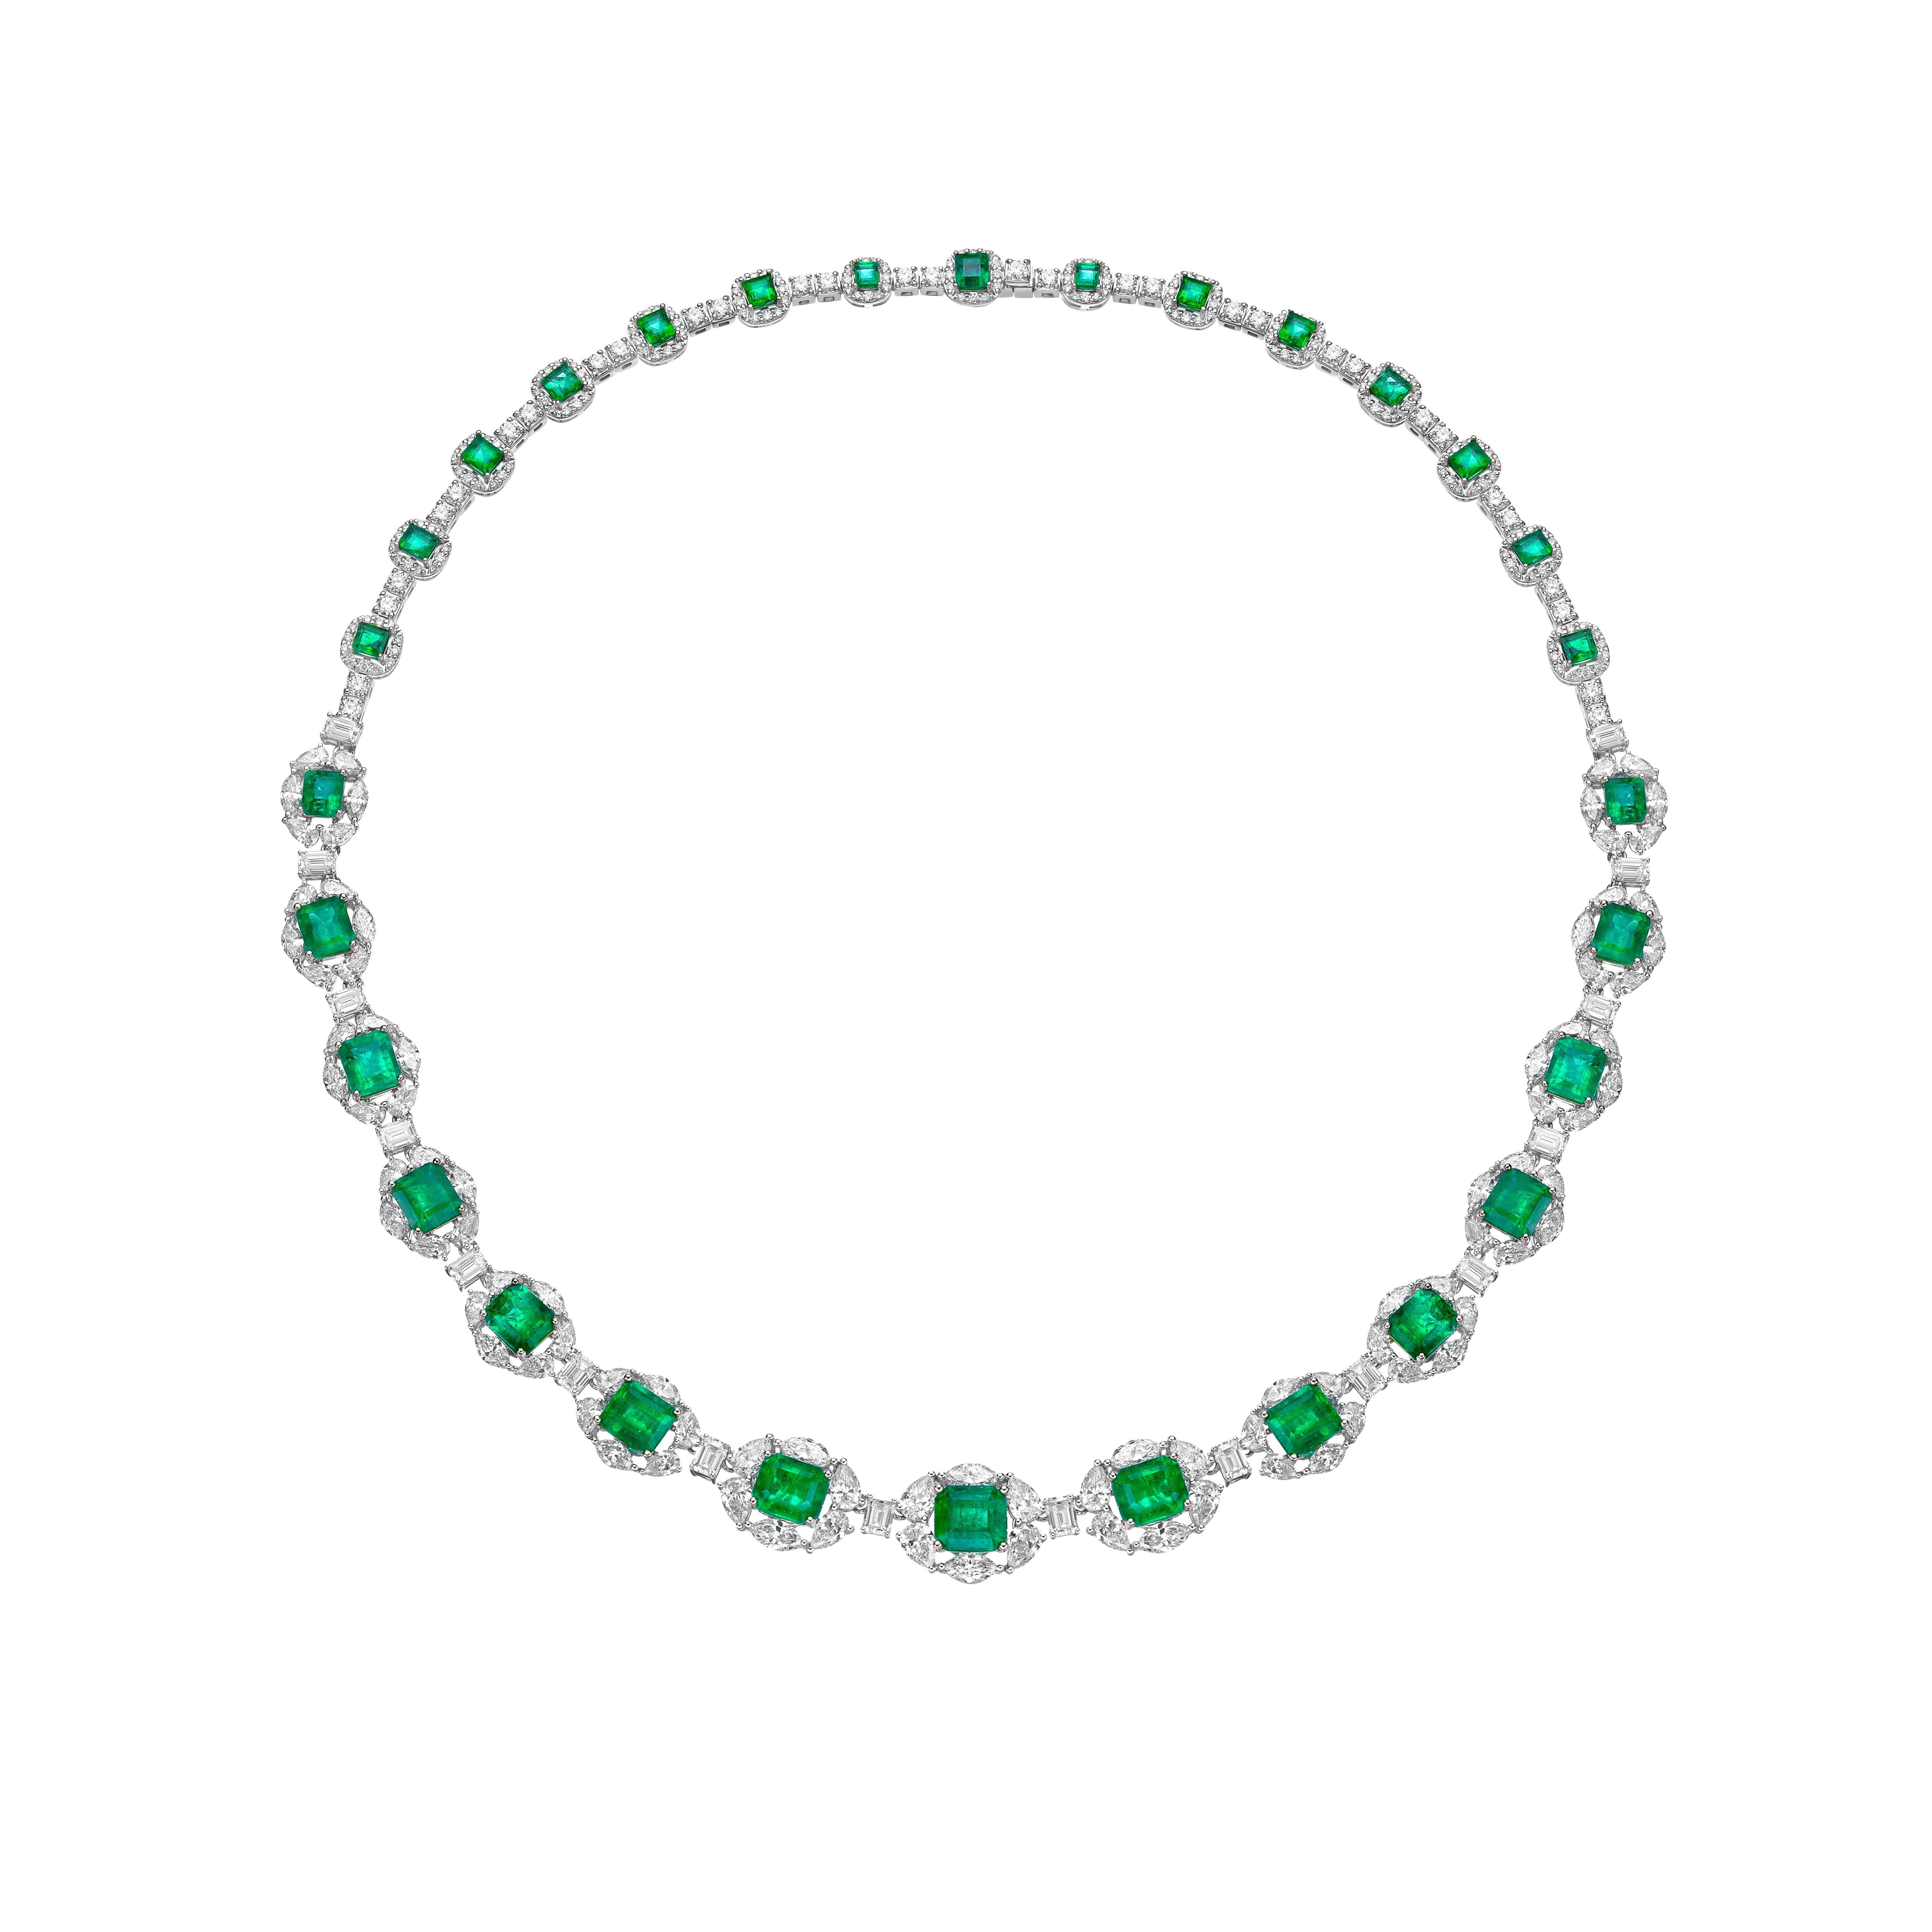 Octagon Cut 16.63 Carat Emerald Necklace in 18KWYG with White Diamond. For Sale